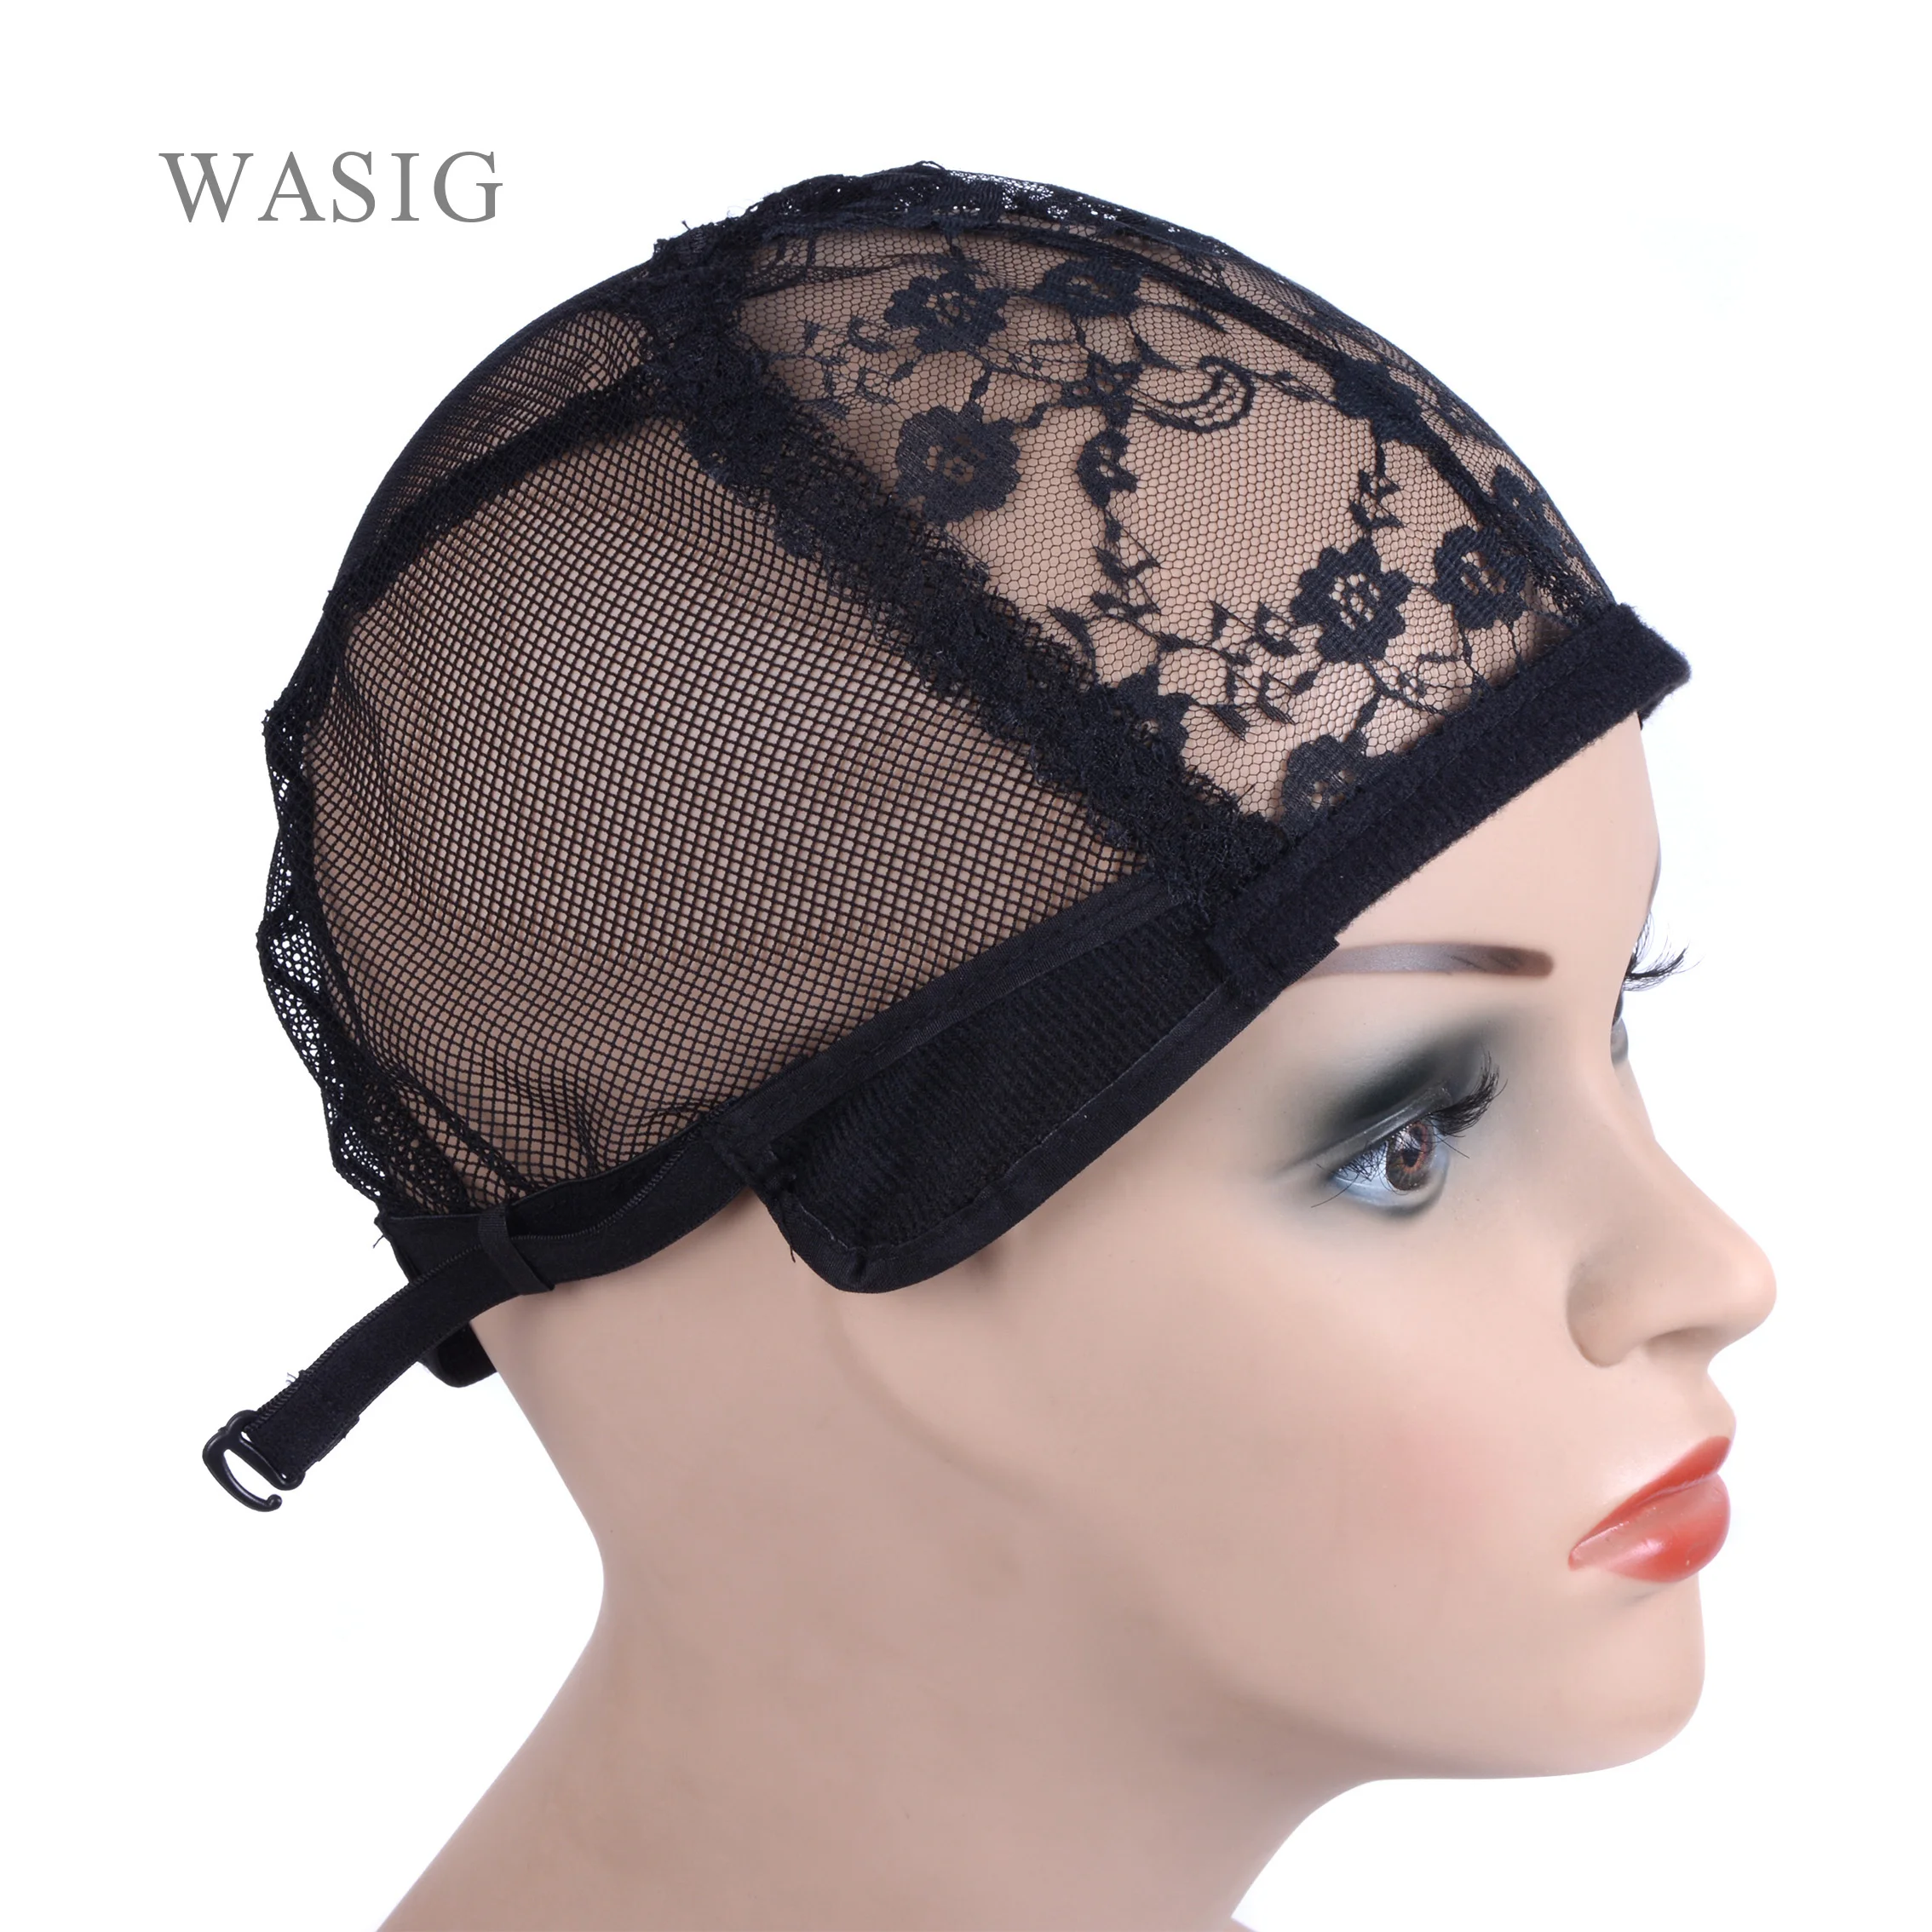 1pcs Wig Cap for Making Wigs with Adjustable Strap on the Back Weaving Cap  Glueless Wig Caps Good Quality Hair Net Black